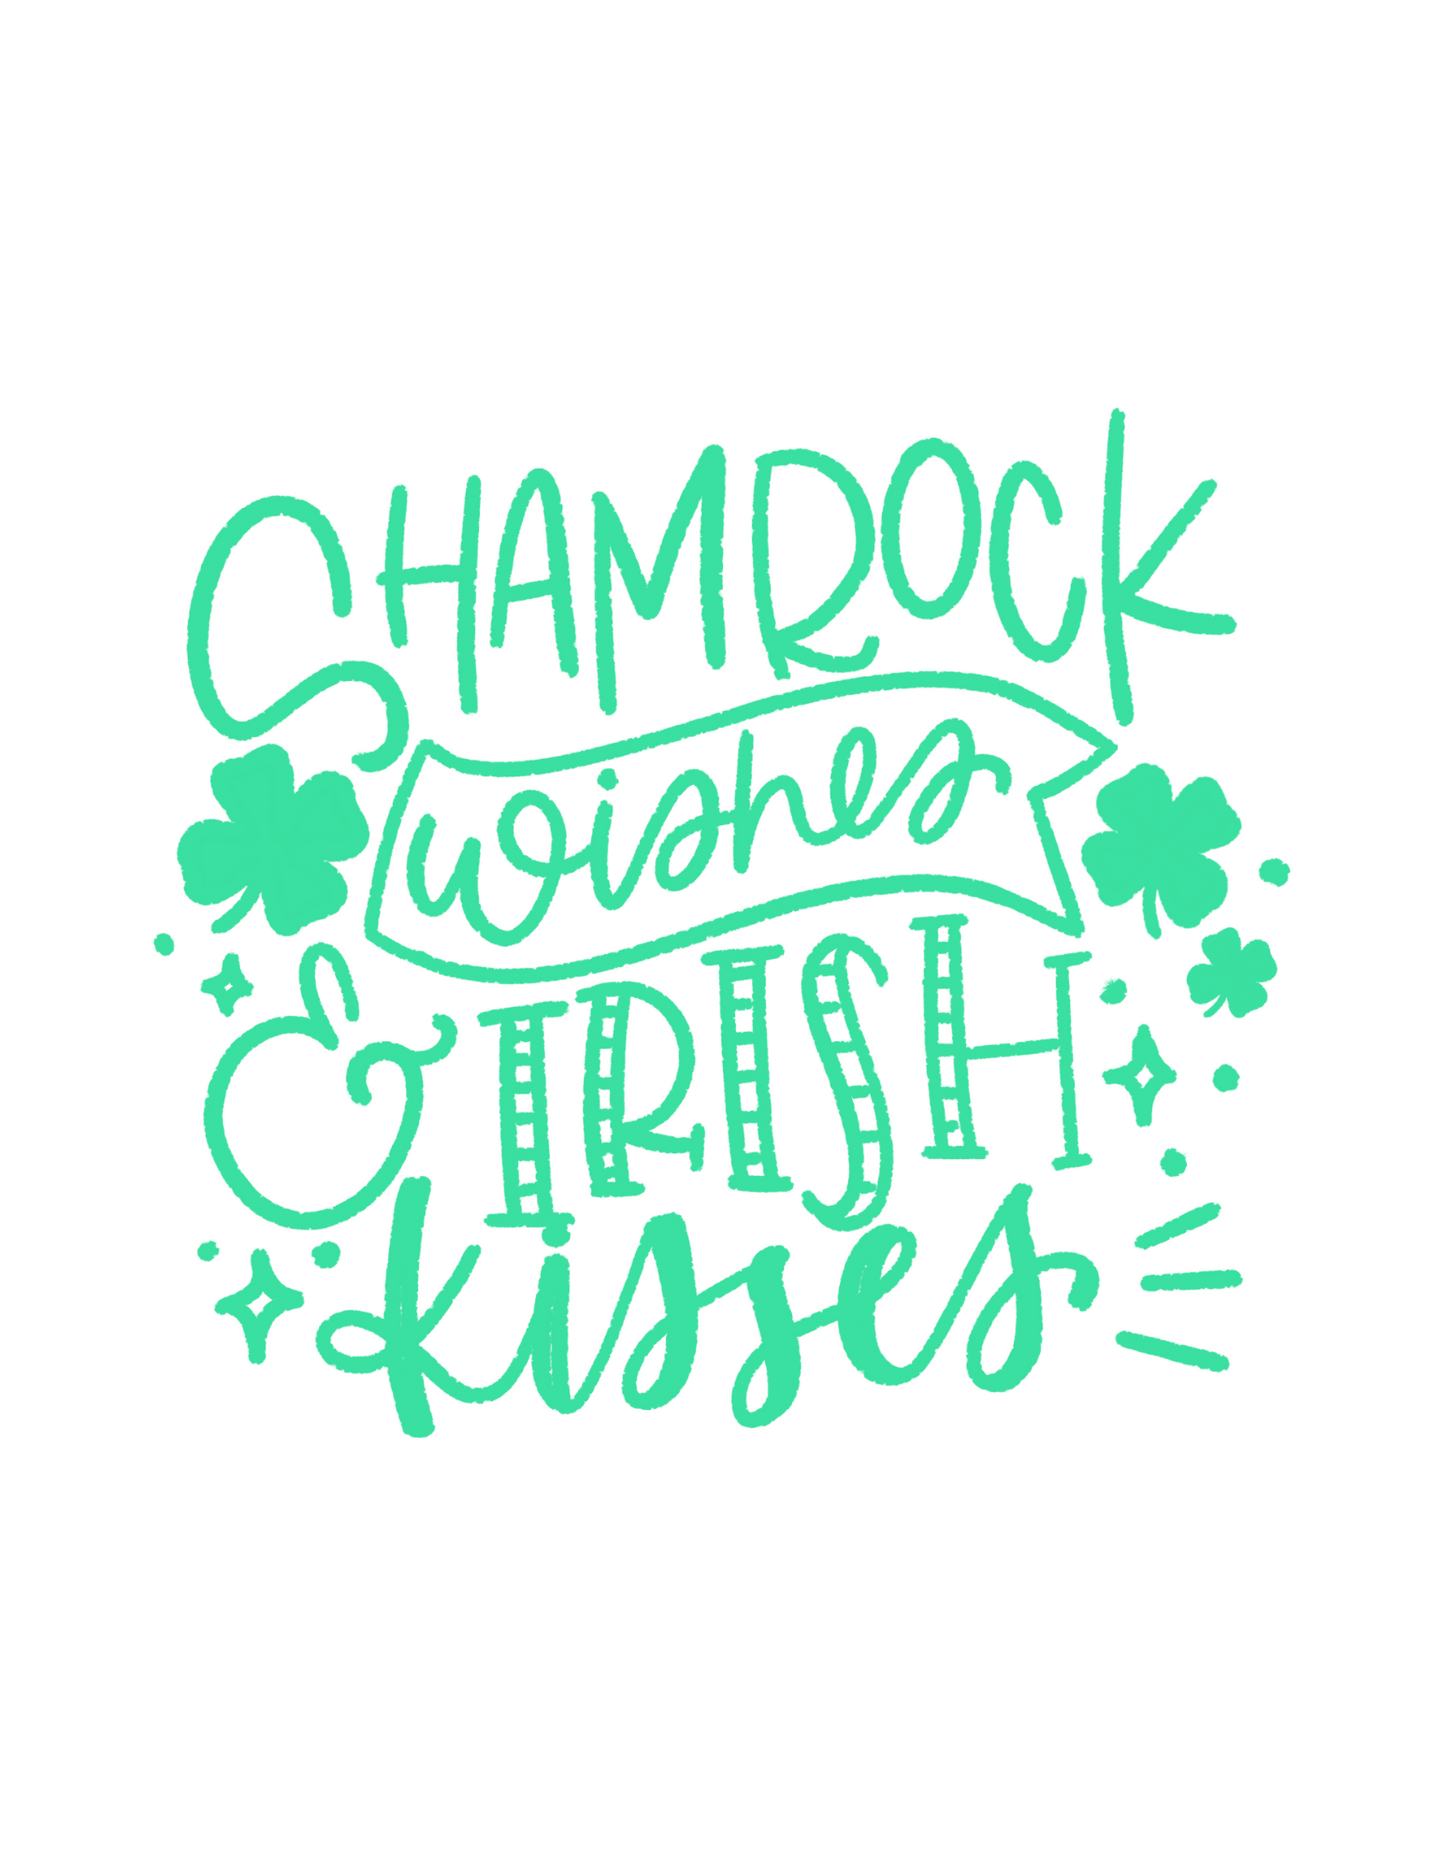 The Luckiest St. Patrick's Day | Printable Bundle